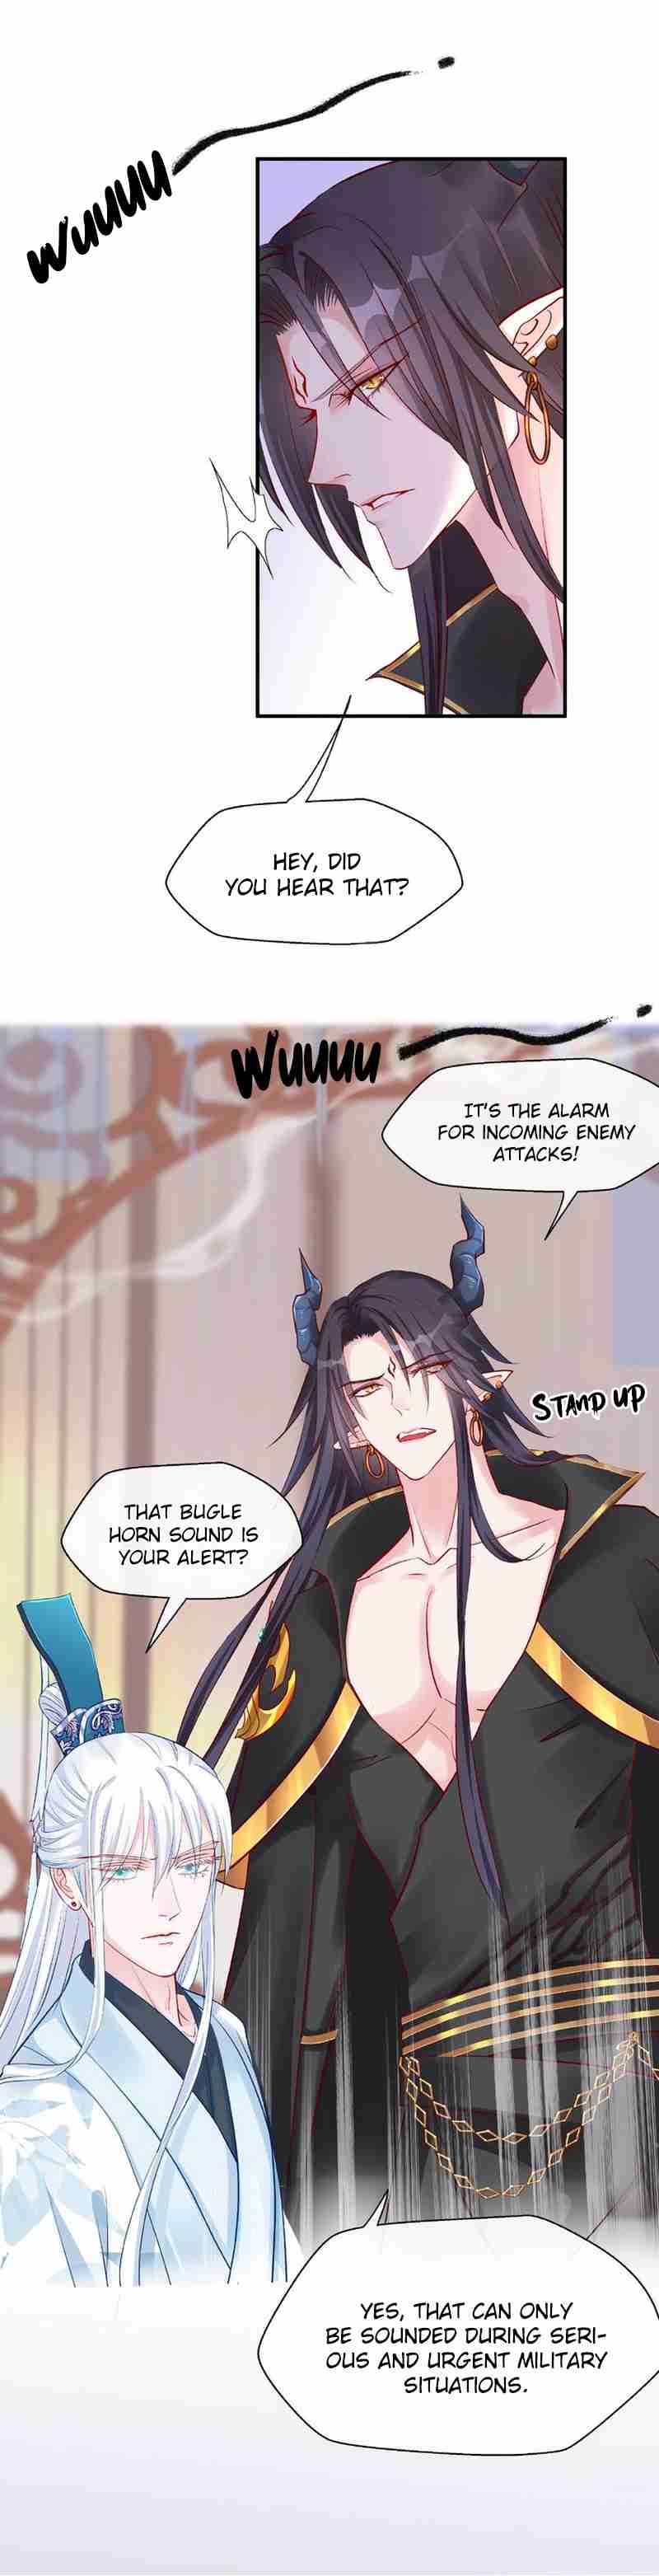 Devil Wants To Hug Ch. 17 The Heavenly Emperor makes his entrance